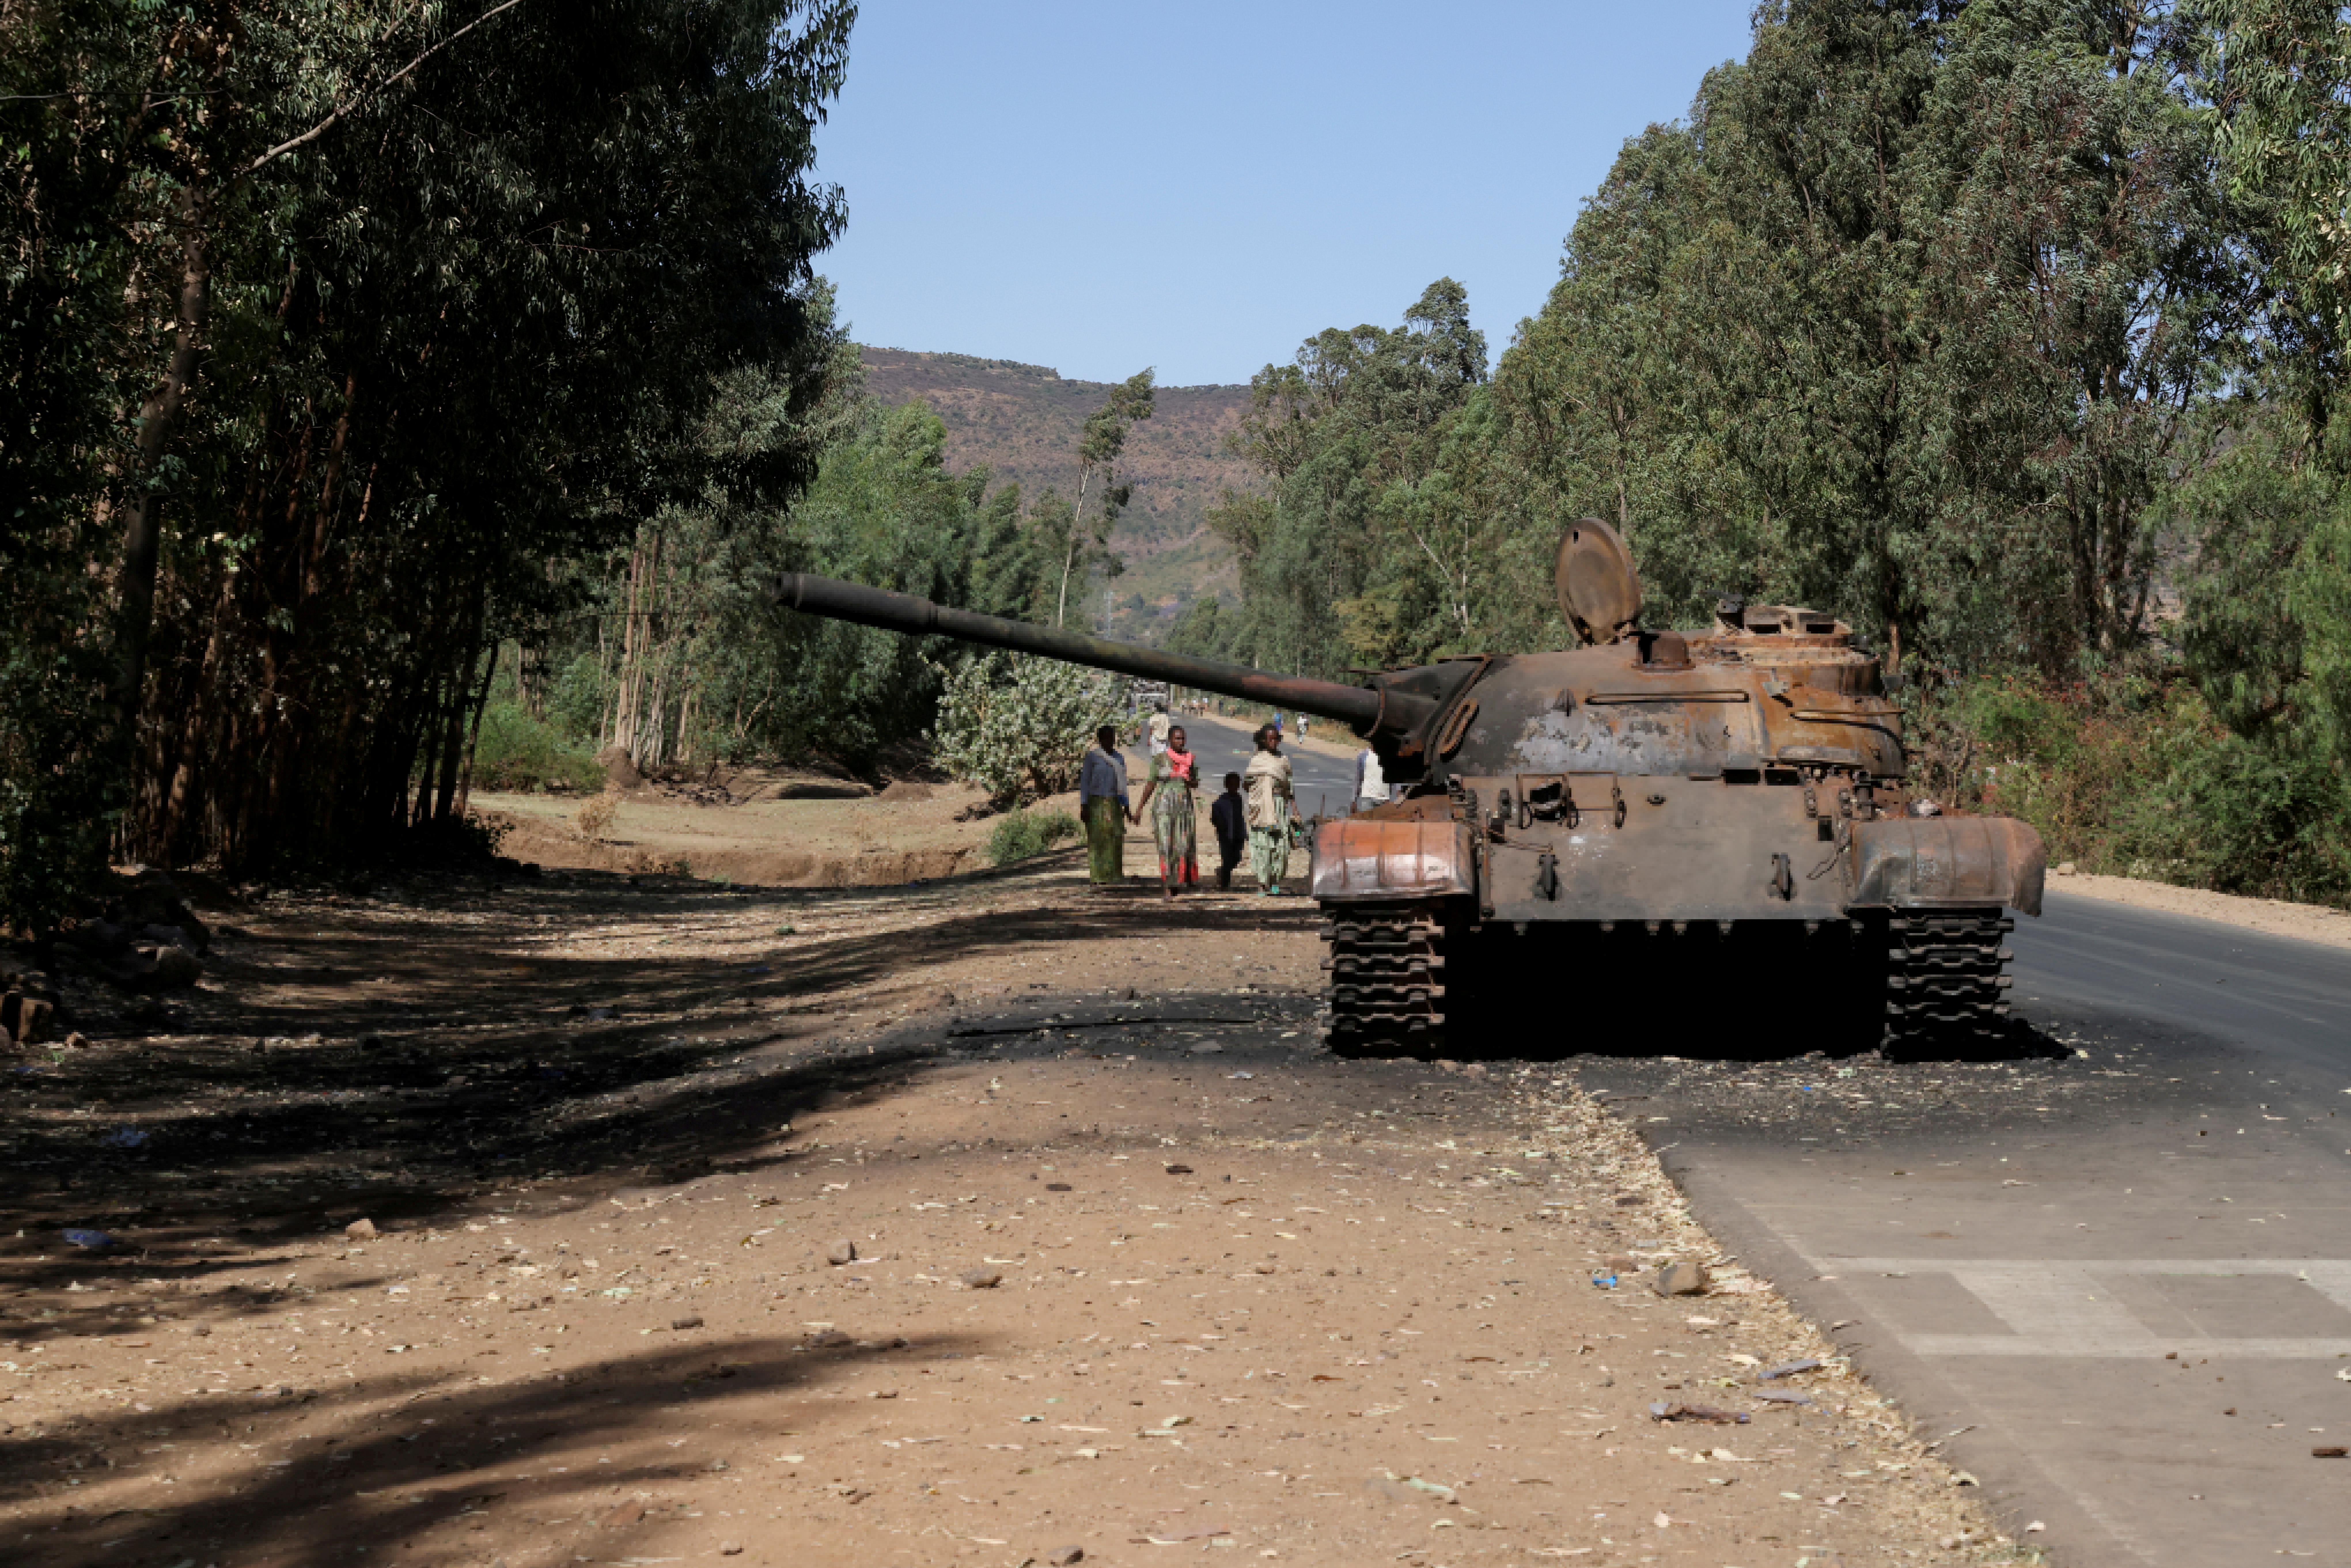 FILE PHOTO: A burned tank stands near the town of Adwa, Tigray region, Ethiopia.